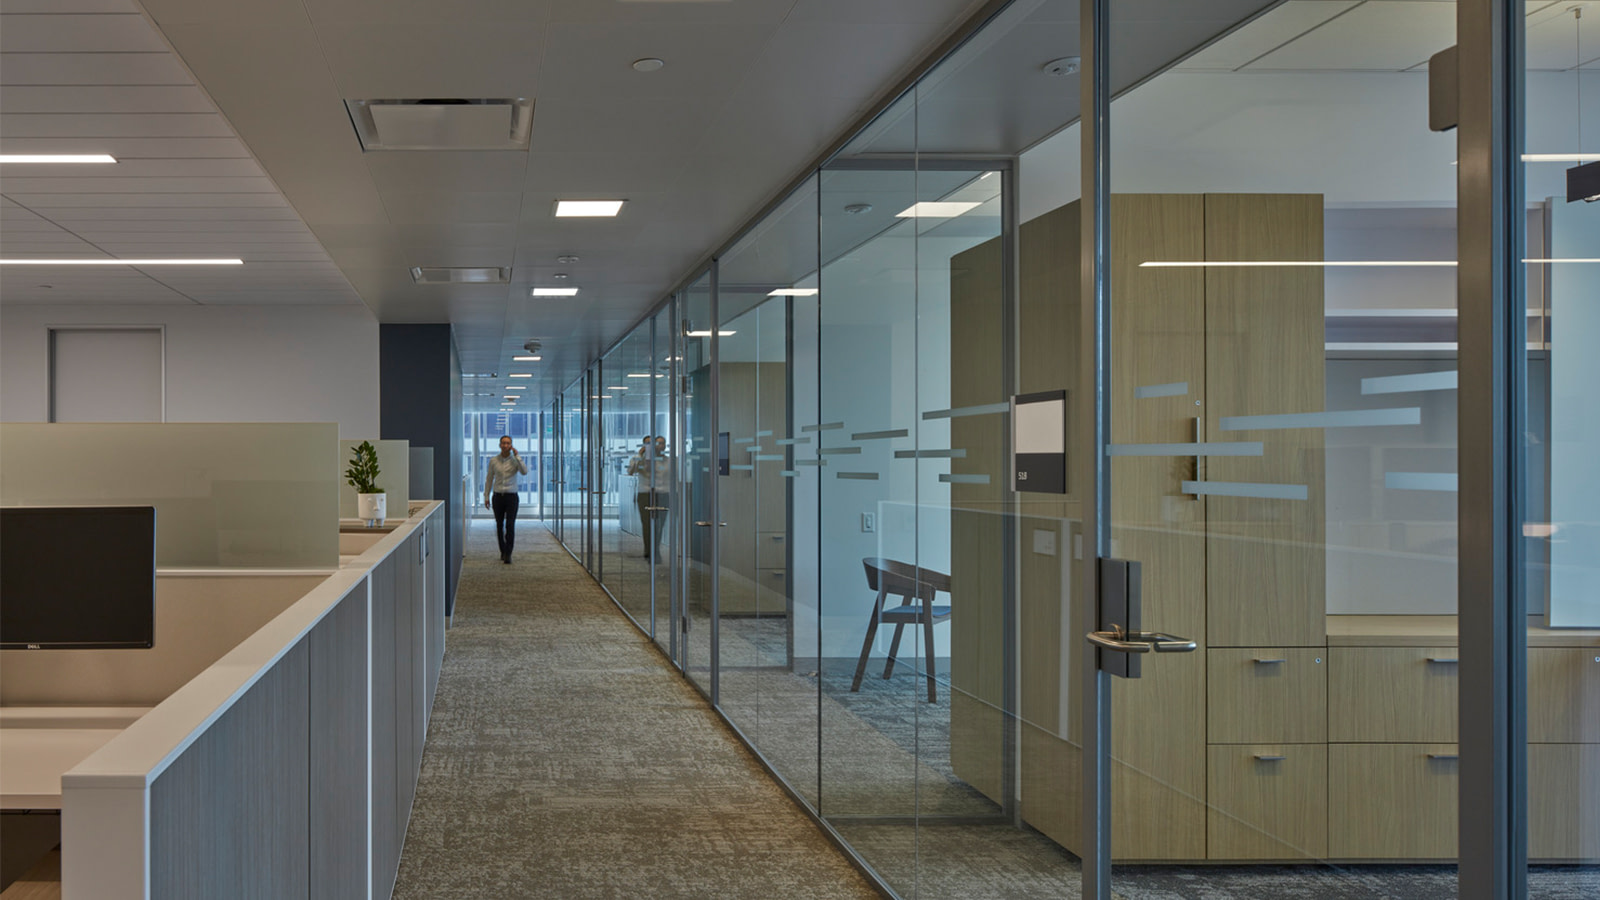 Law office architects IA designed these halls